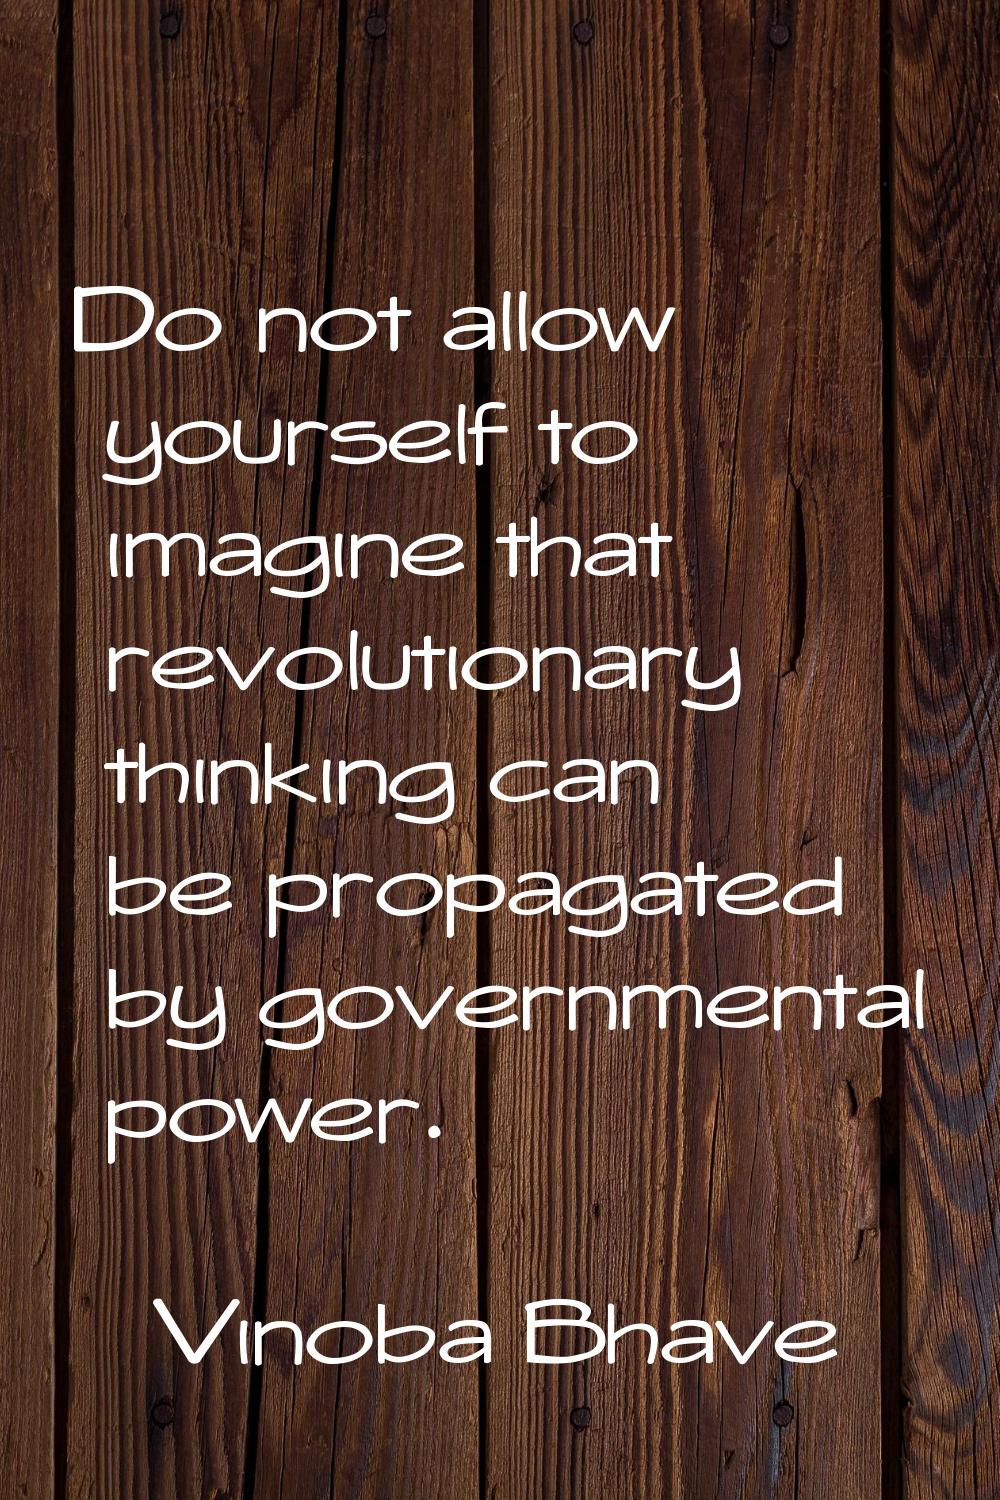 Do not allow yourself to imagine that revolutionary thinking can be propagated by governmental powe